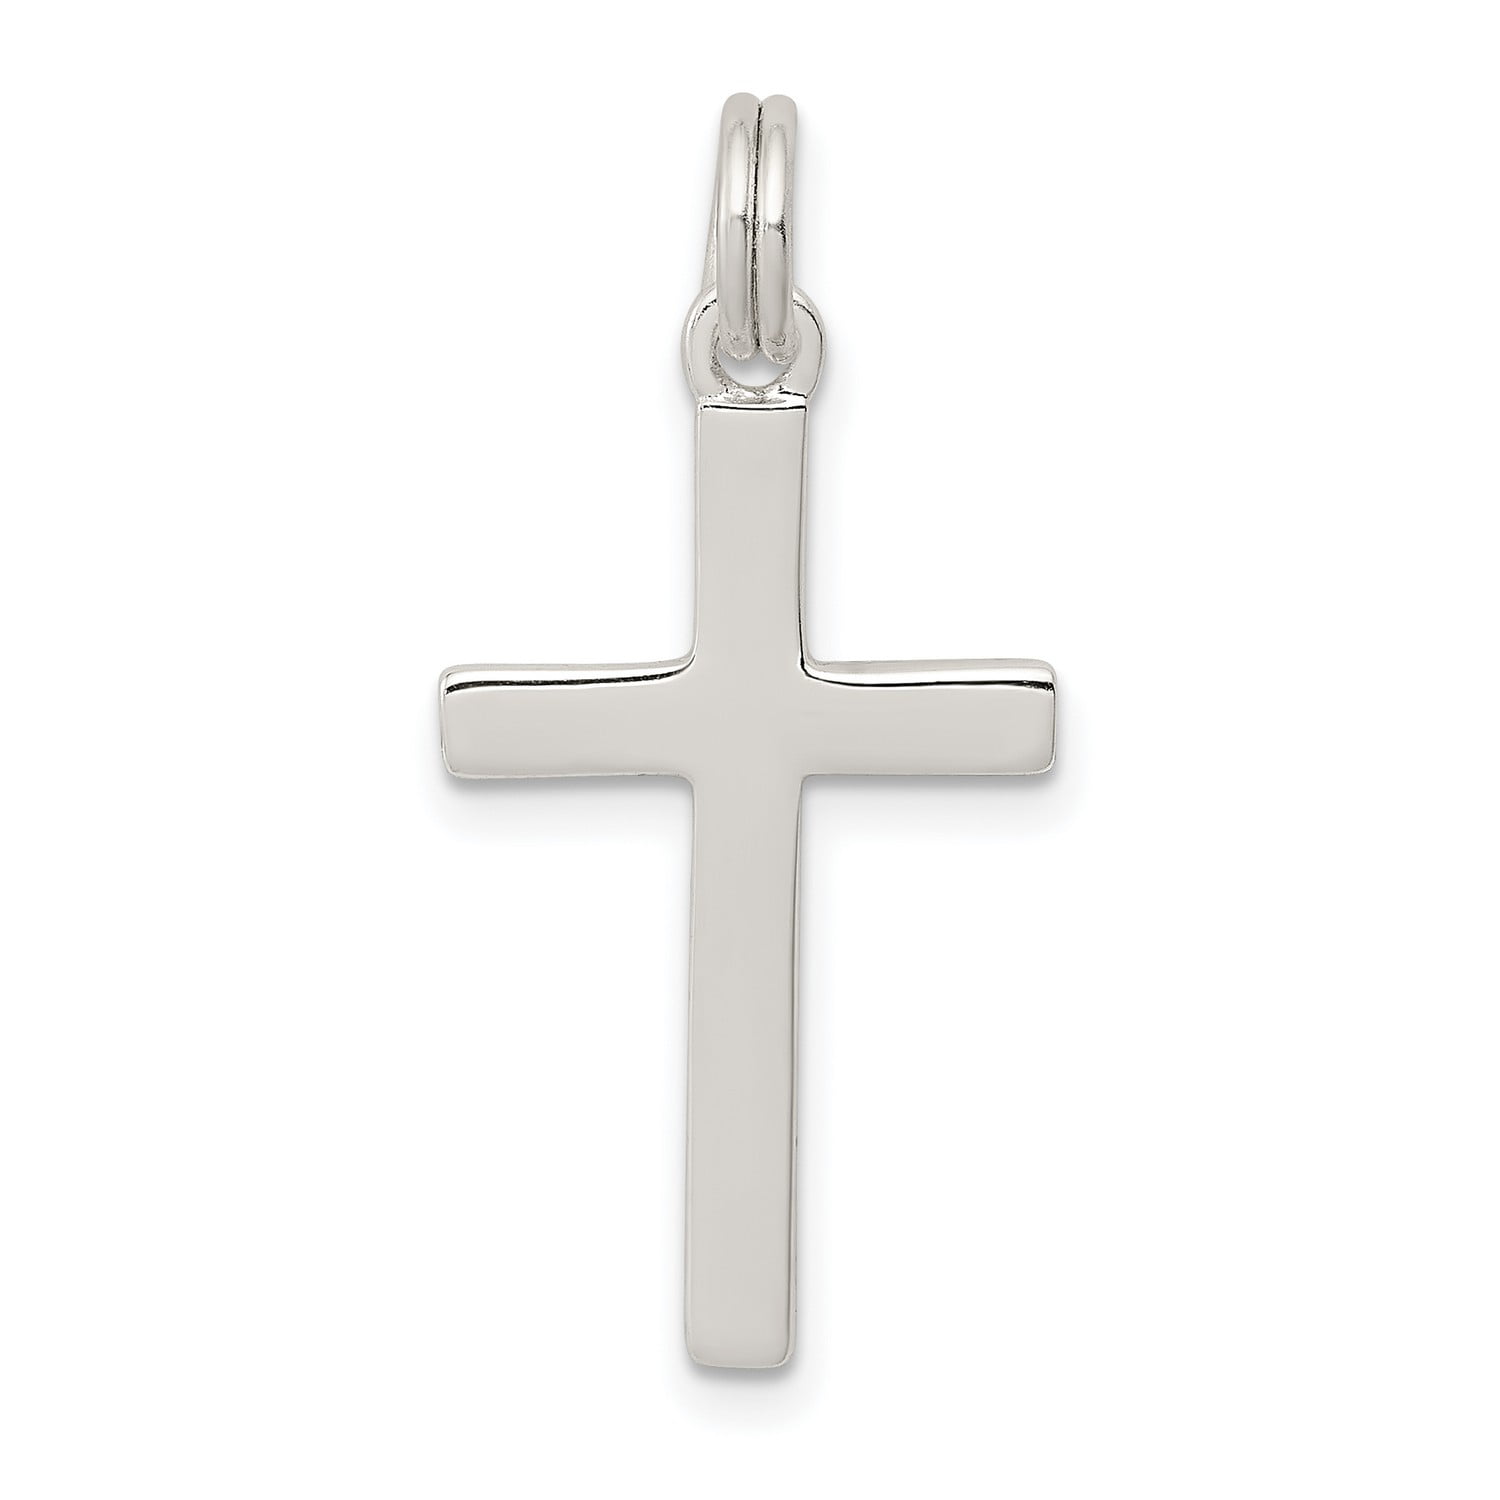 925 Sterling Silver Polished Cross Charm Pendant 23mm x 14mm